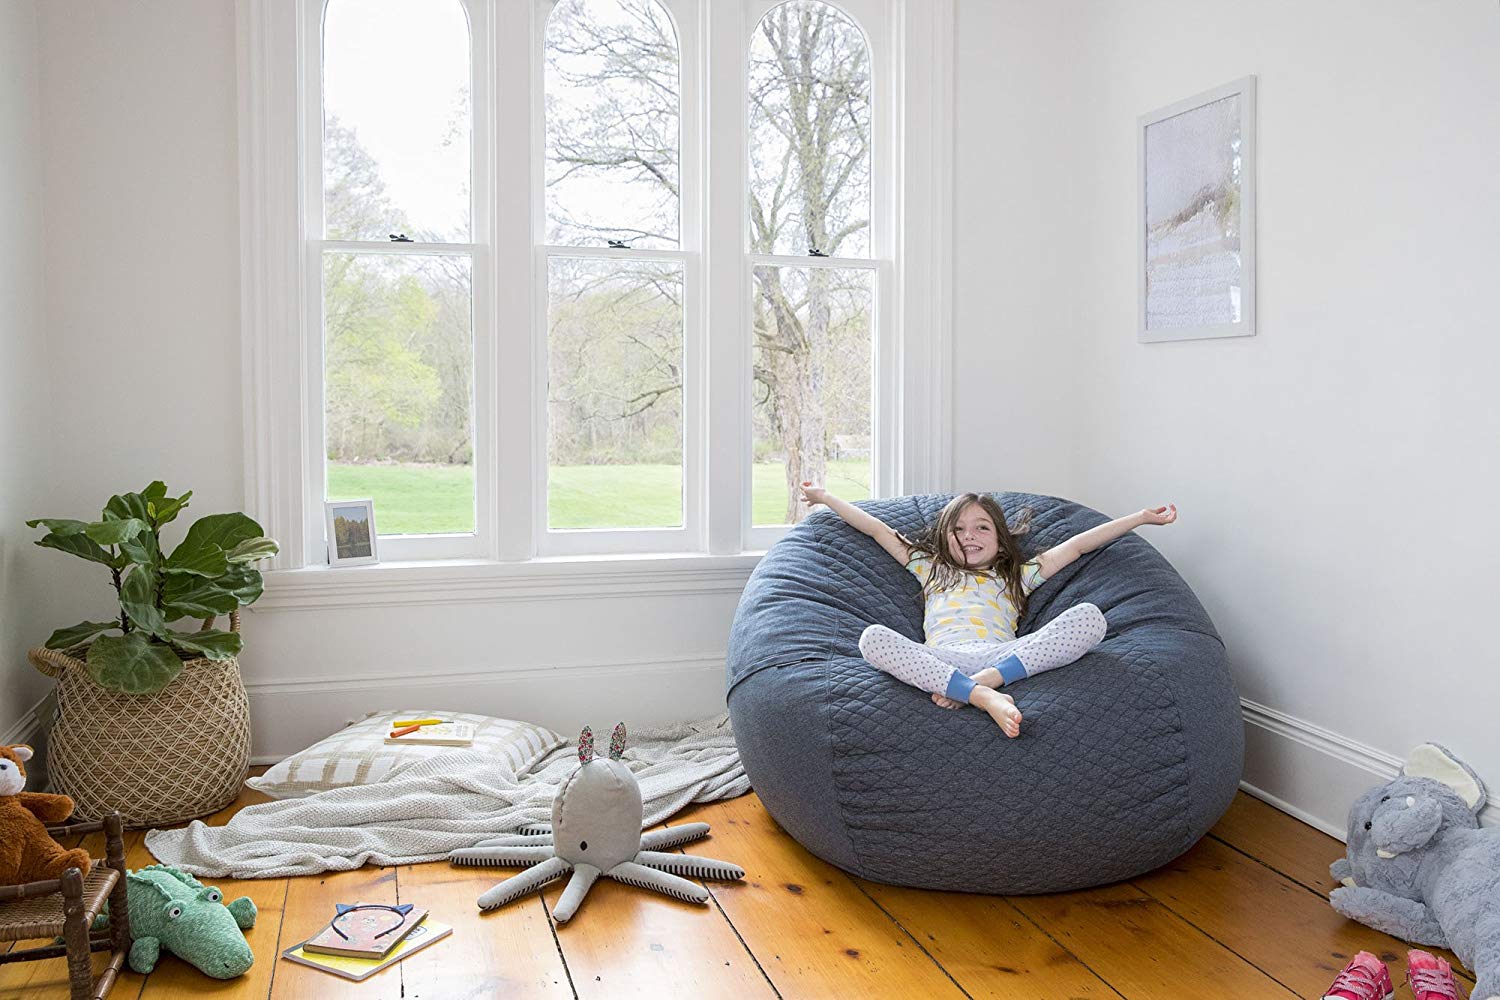 Top 10 Best Bean Bag Chairs in 2022 Reviews | Buyer's Guide